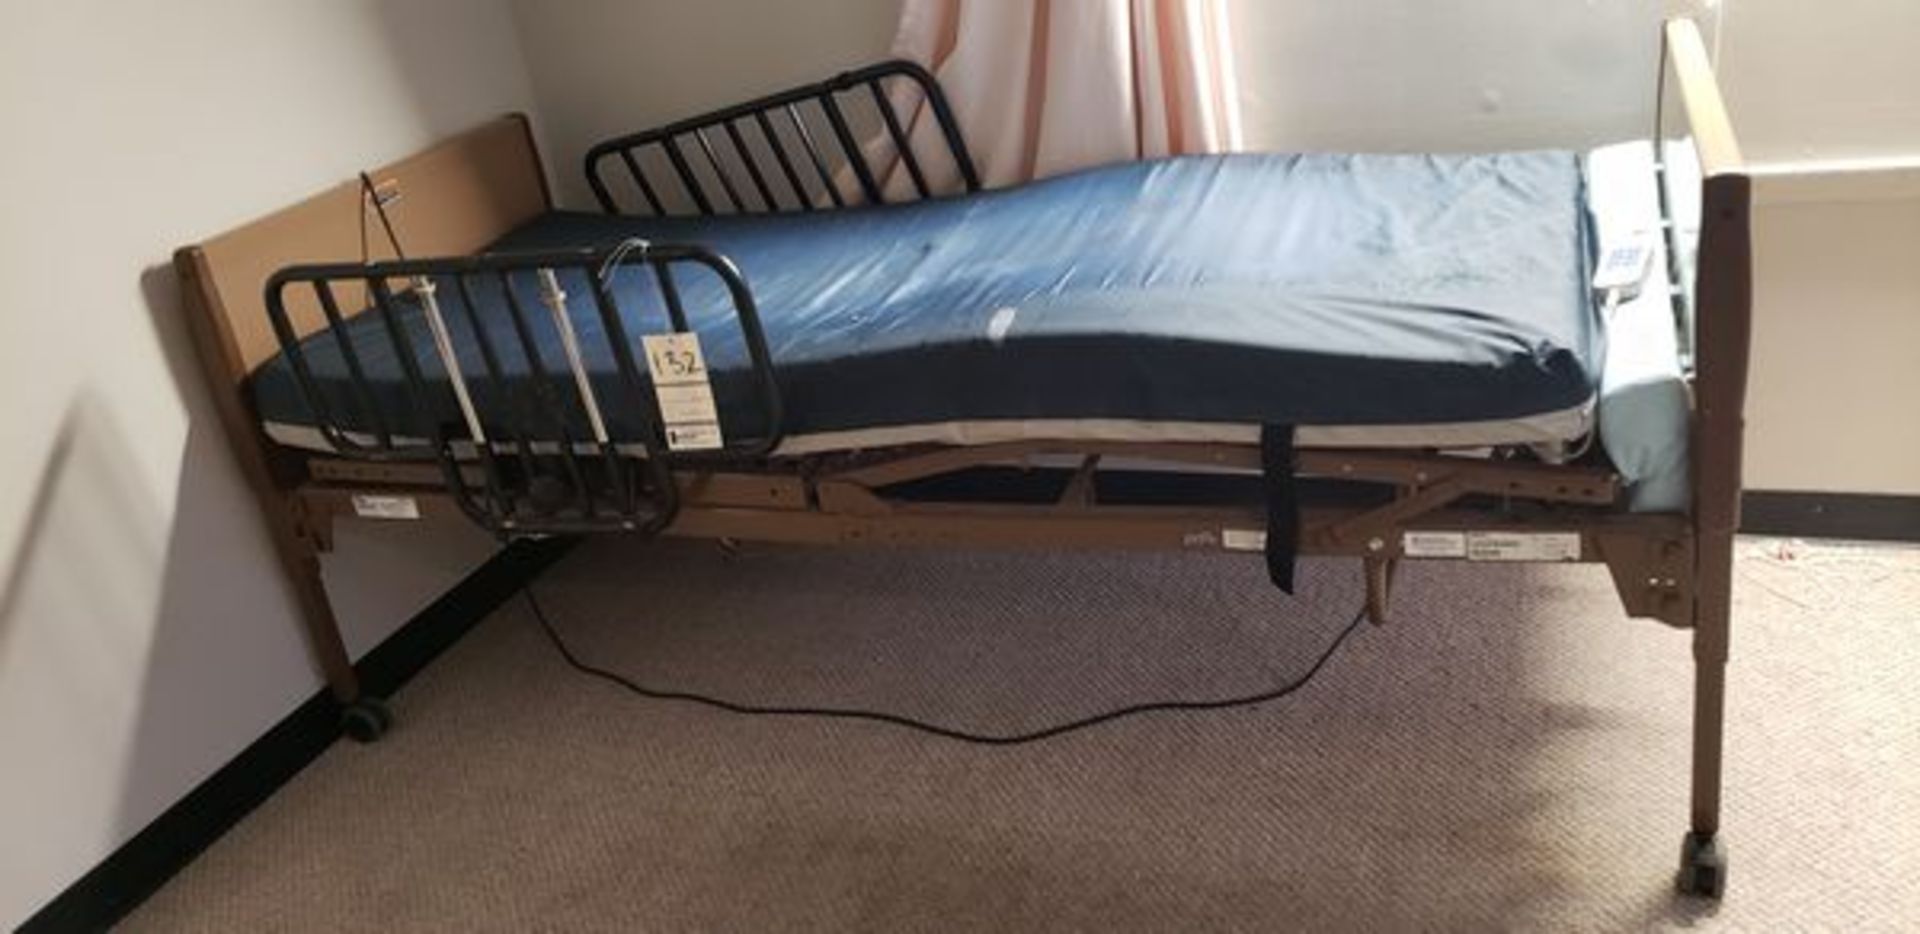 INVACARE HOSPITAL BED MODEL 54901VC